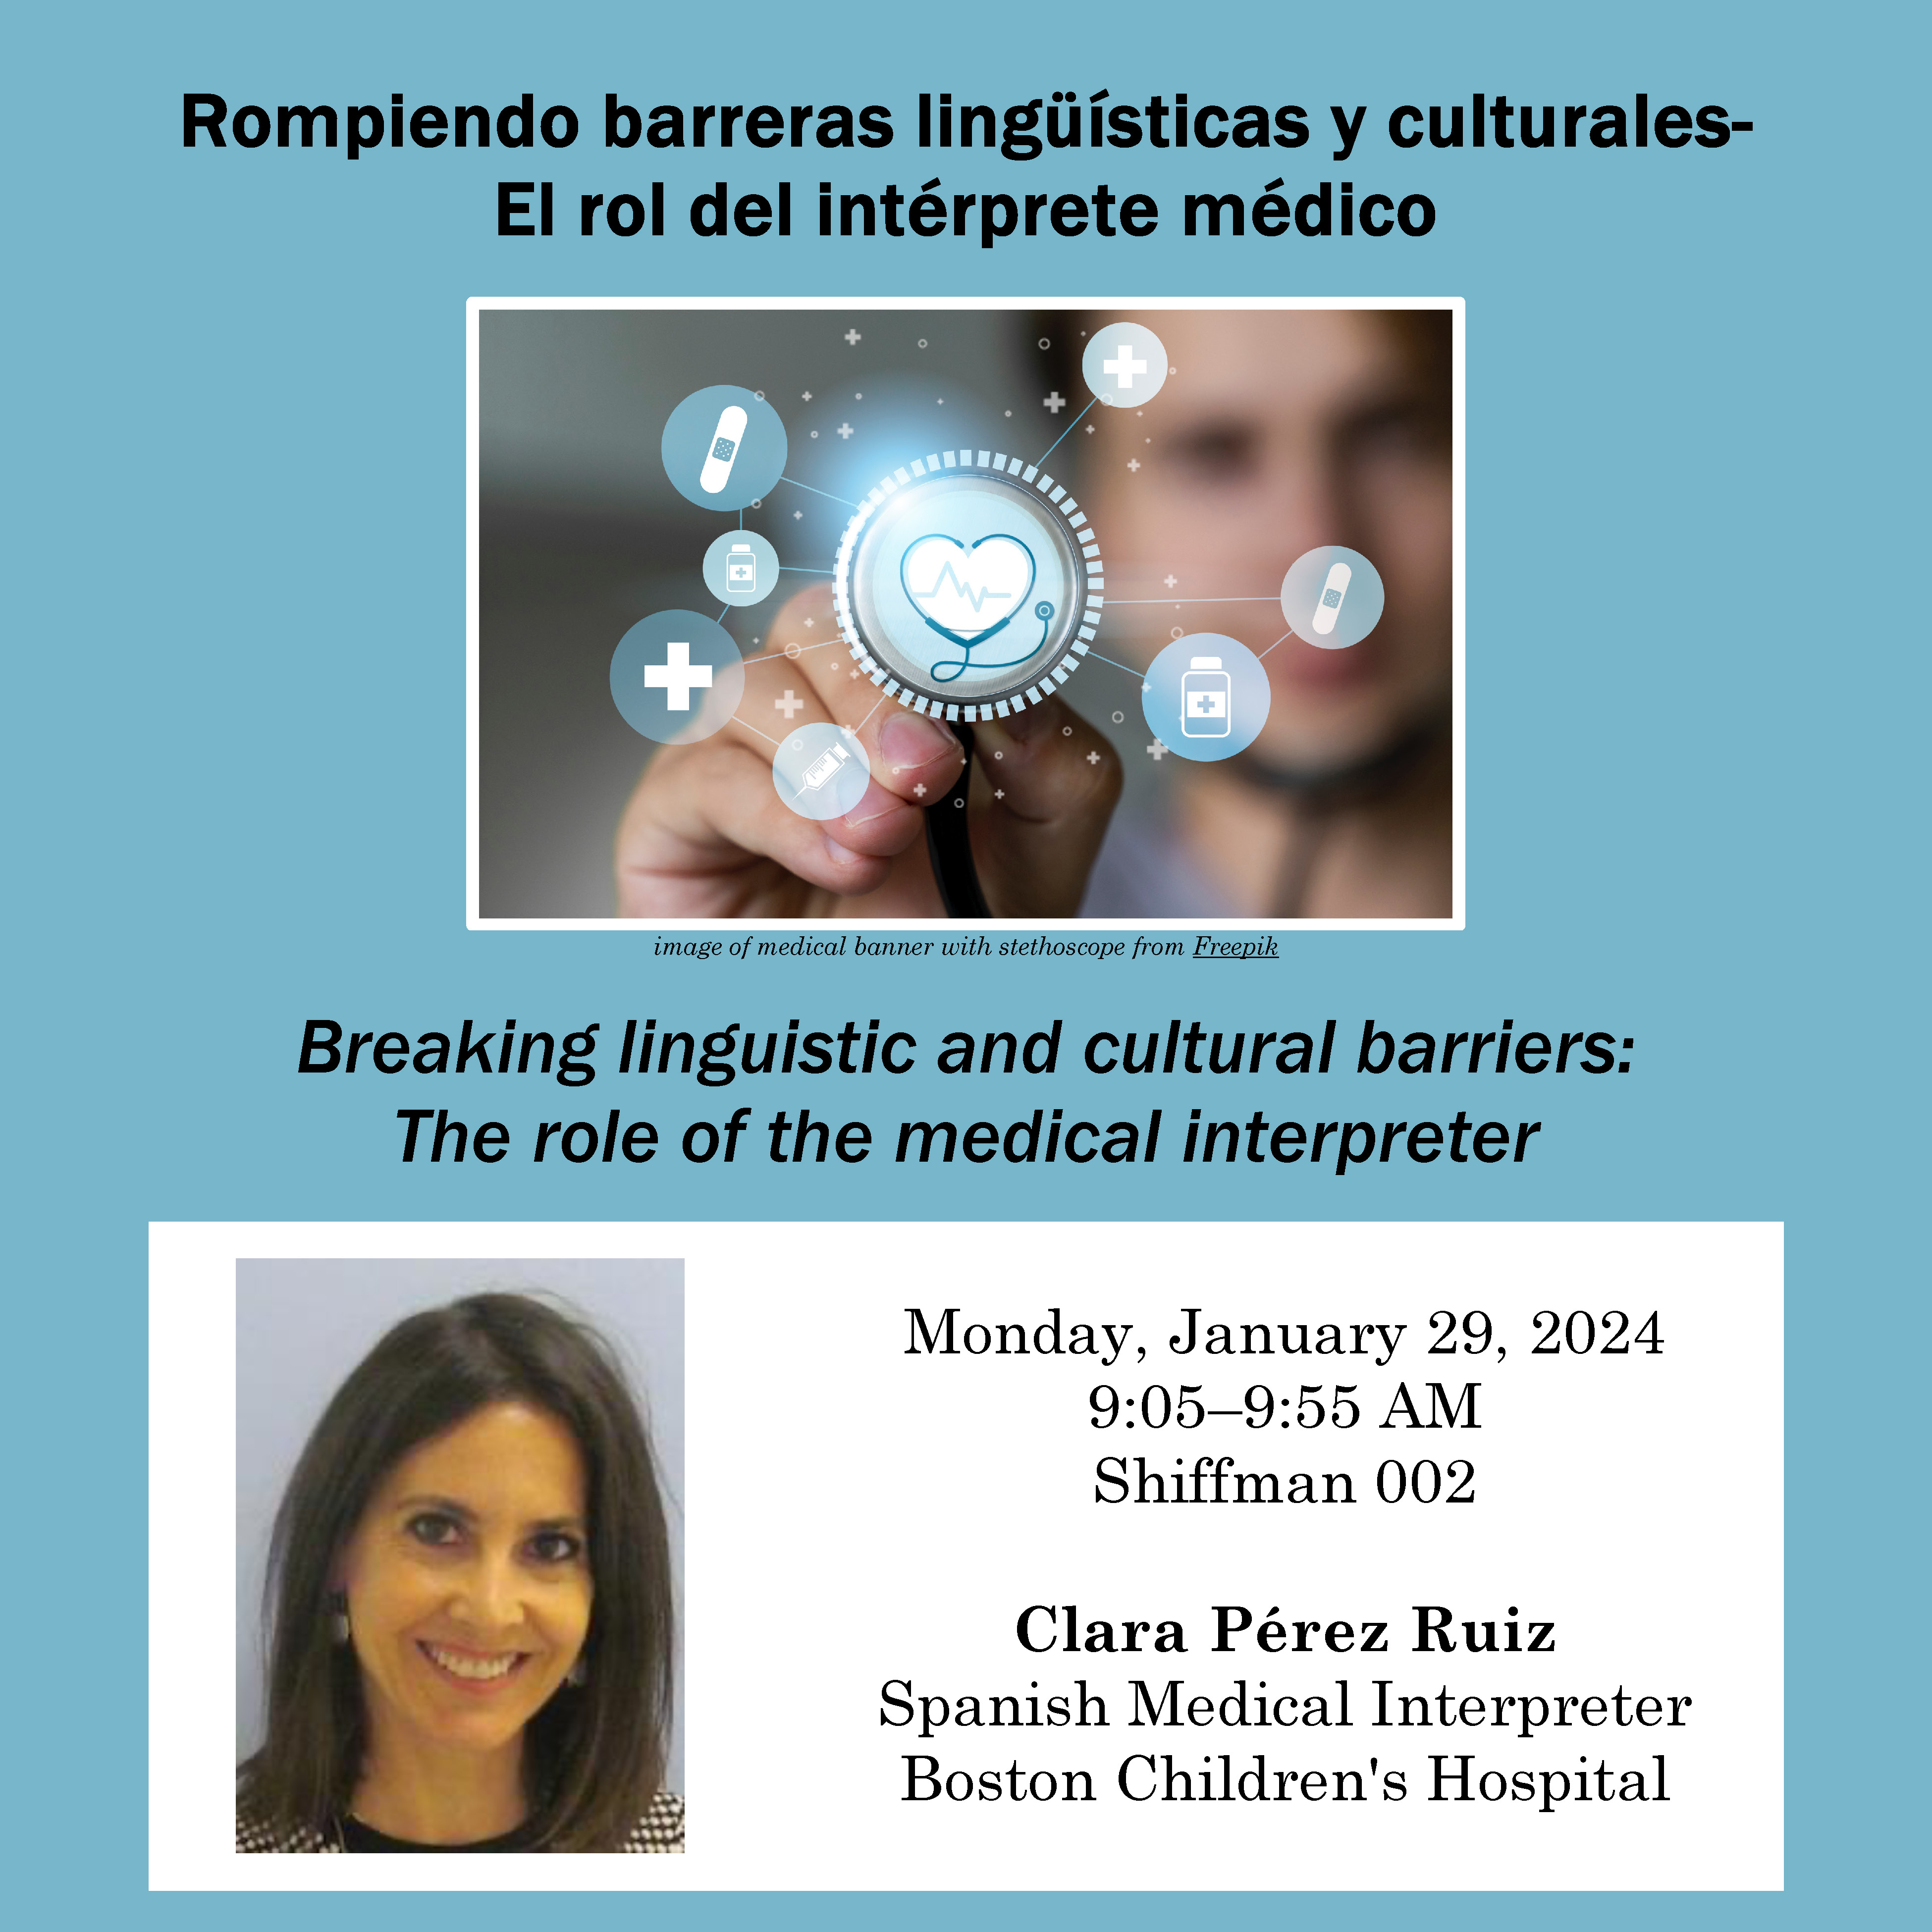 flyer for medical interpreter event. image of medical banner with stethoscope and photo of Clara Perez Ruiz. text reads same as on this page.